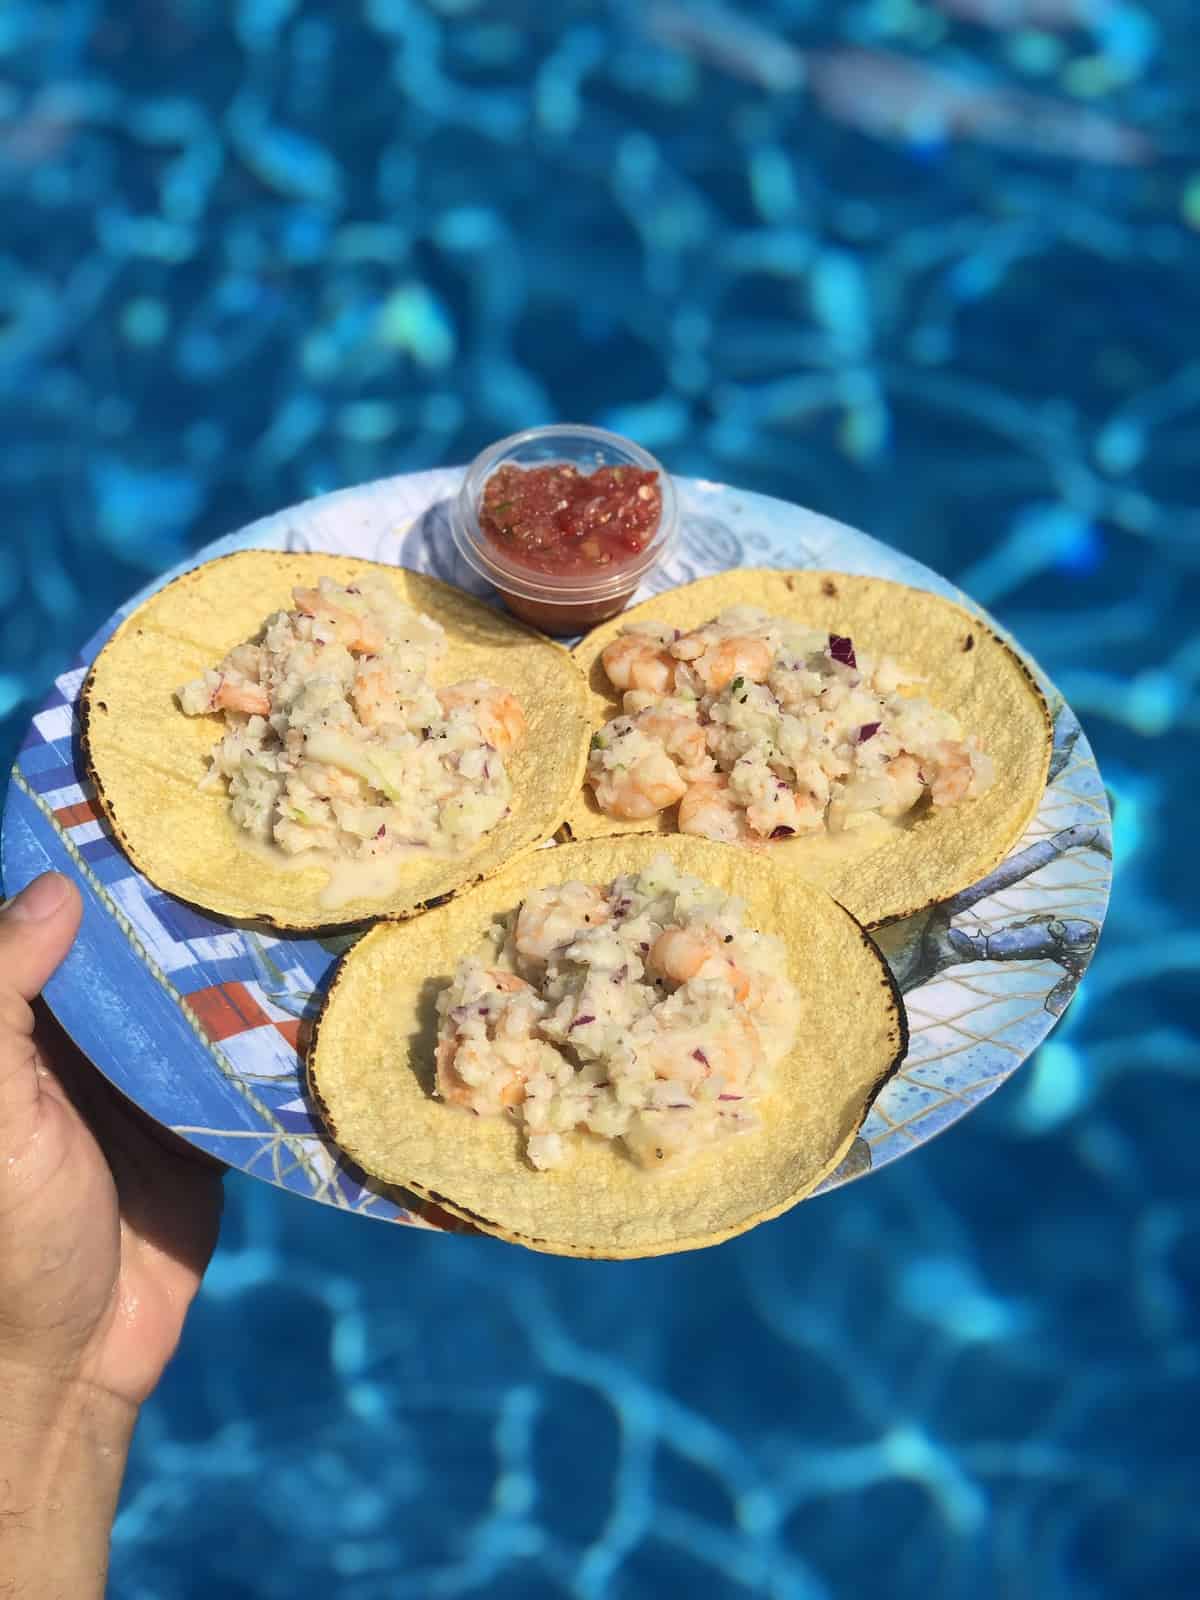 Three shrimp salad tortillas on a blue plate by the swimming pool